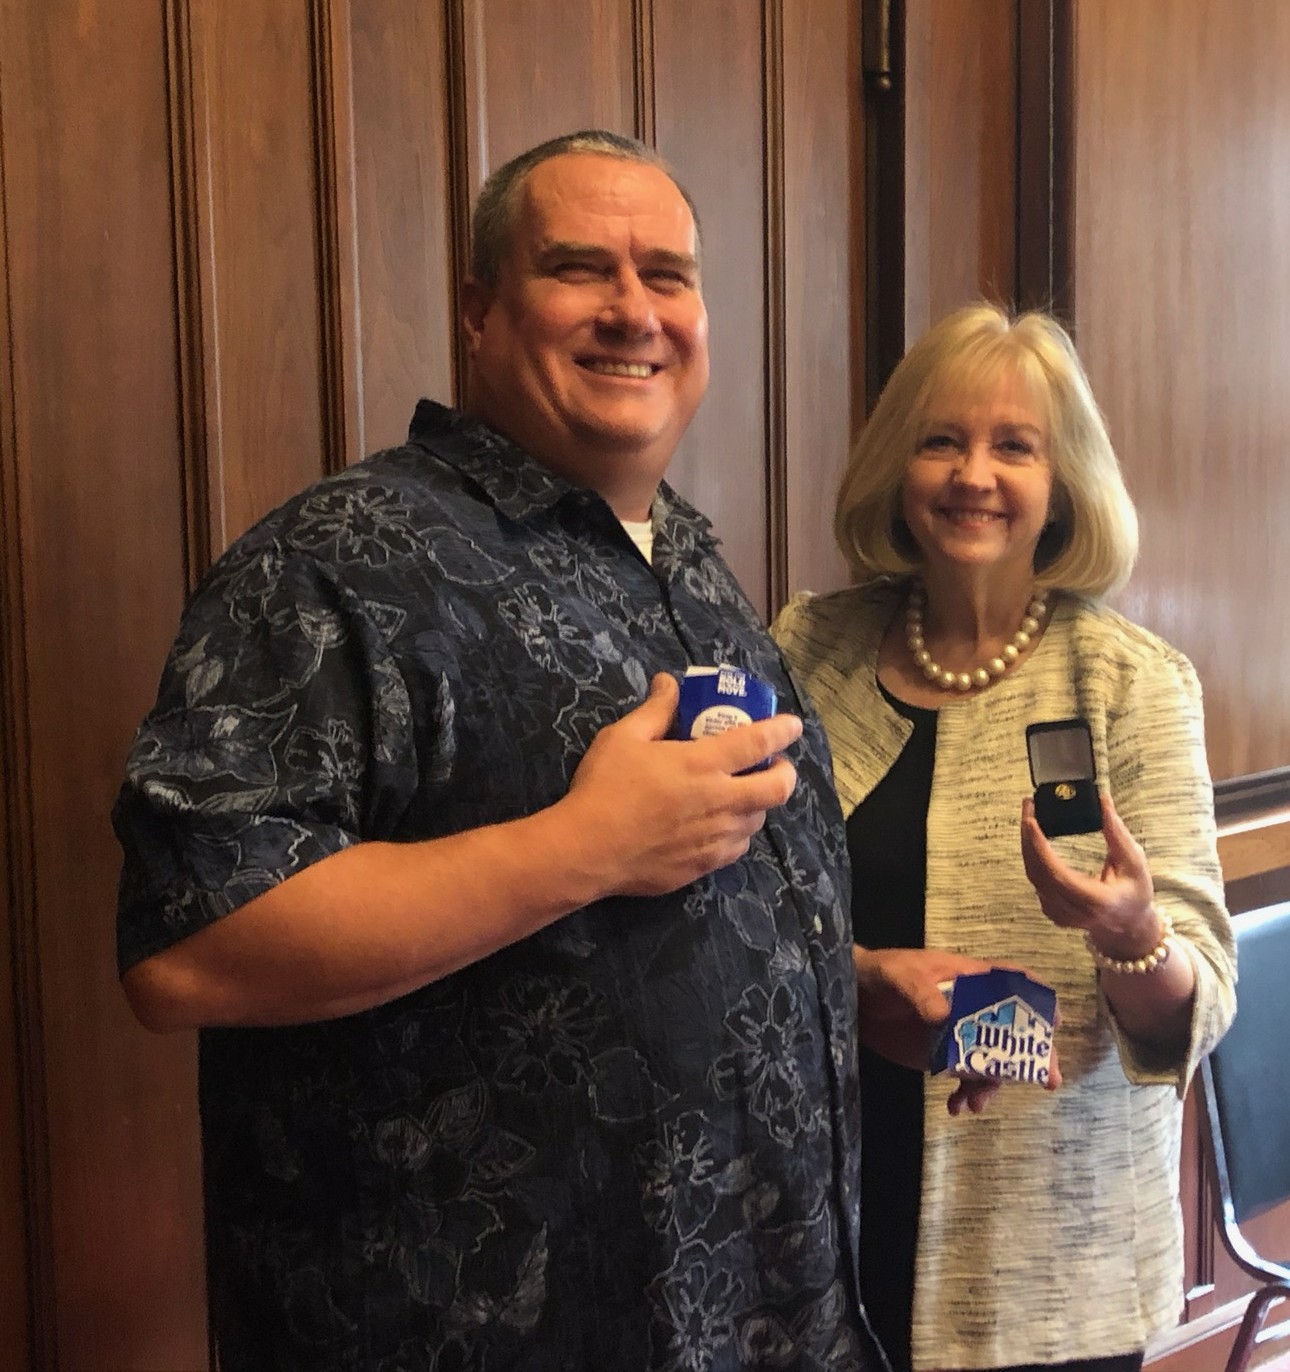 Todd Waelterman receives his 30-year pin and favorite White Castles from Mayor Lyda Krewson before the Cabinet meeting on June 21, 2019.